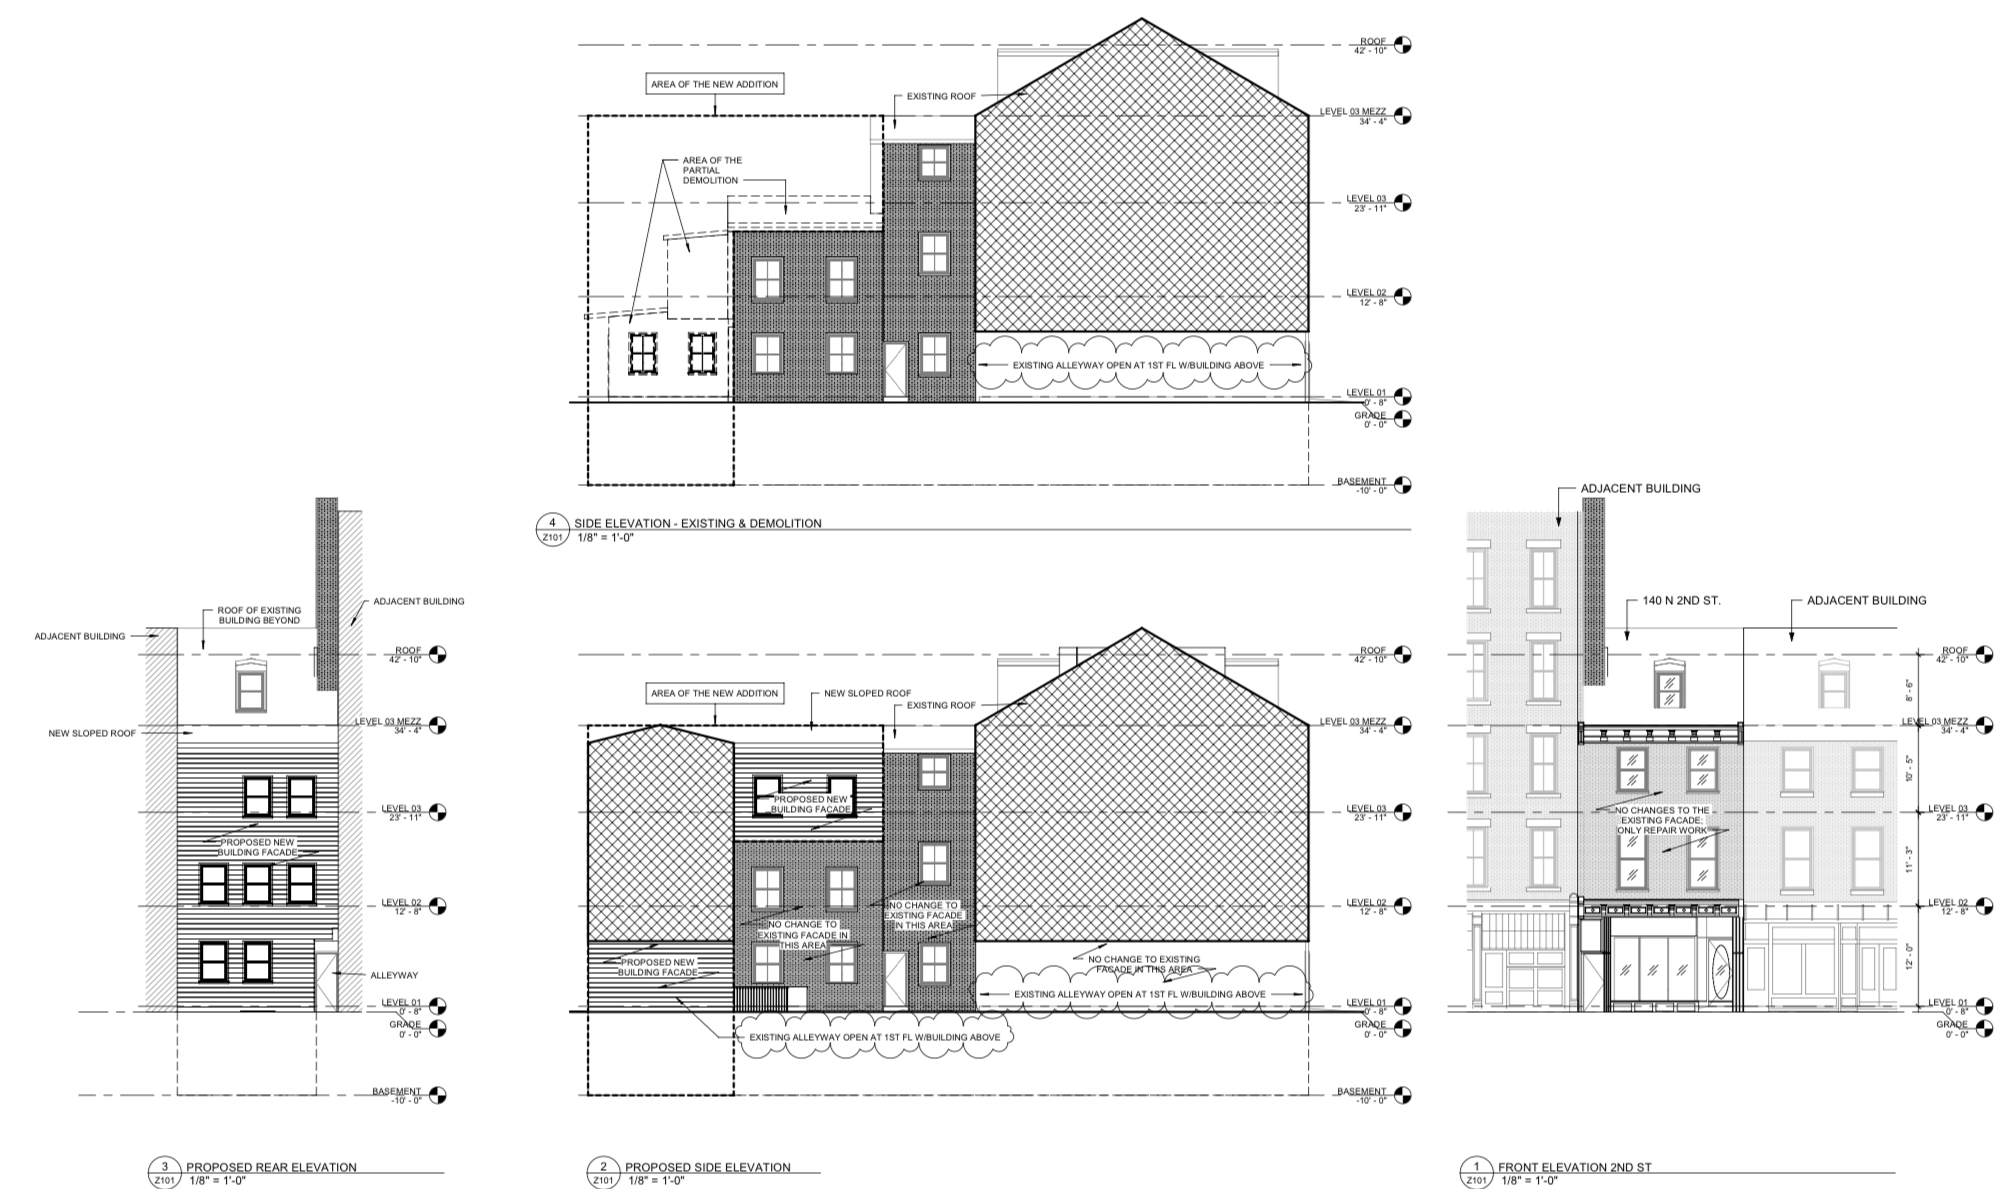 140 North 2nd Street building diagrams from former zoning permit.